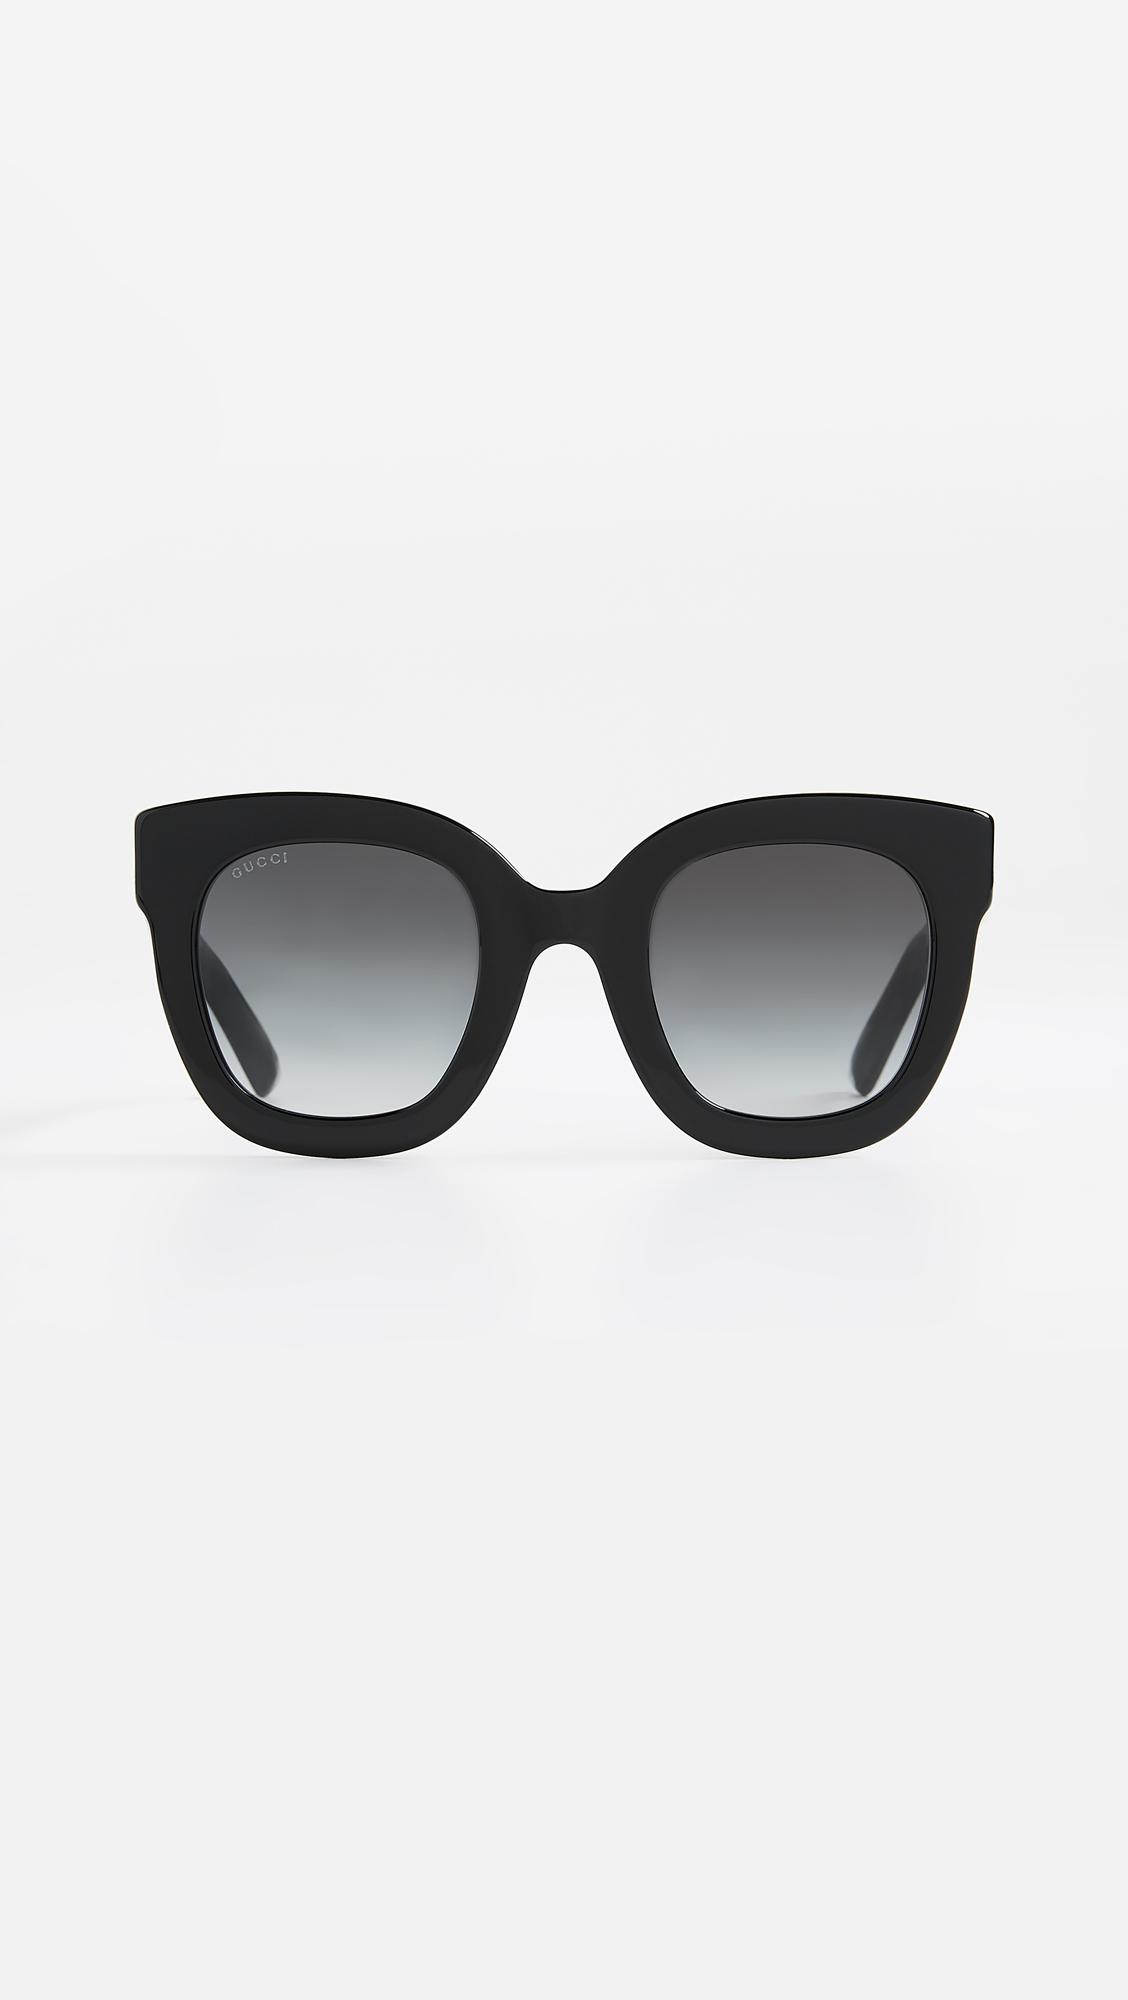 gucci urban stars sunglasses buy clothes shoes online